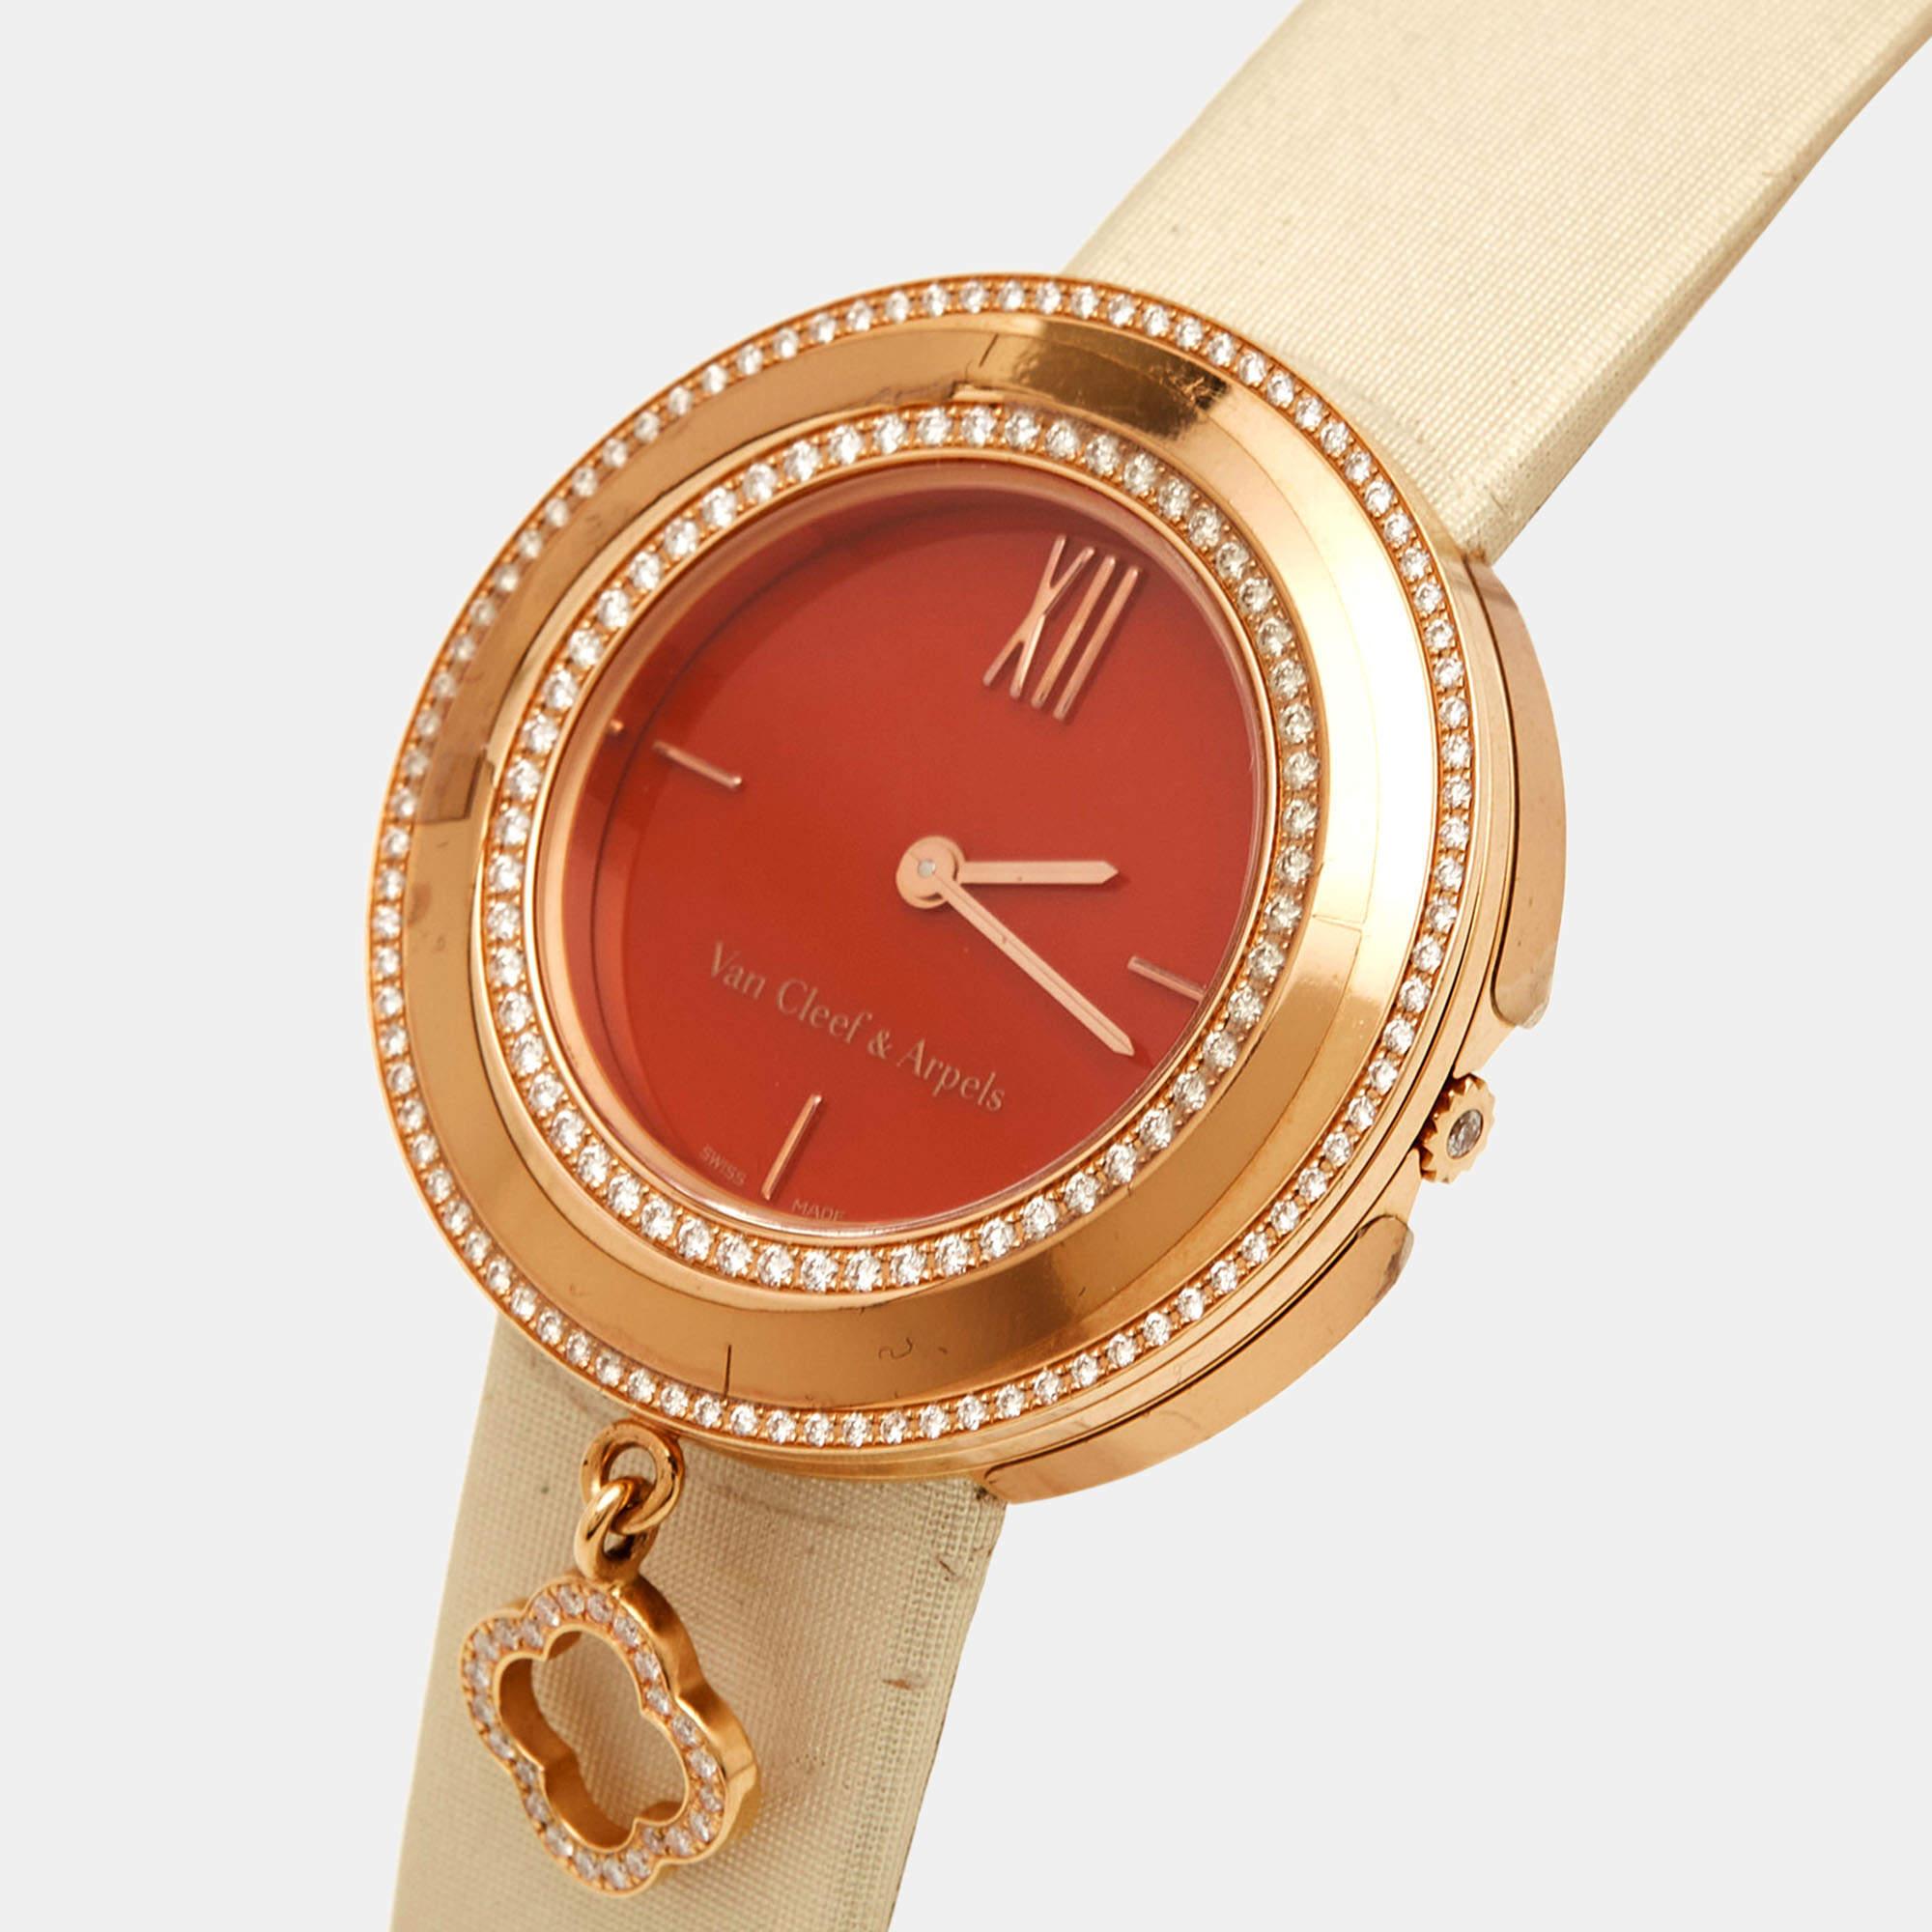 Van Cleef & Arpels continues its legacy of presenting us with wondrous works of art to wear and treasure forever. An 18k rose gold round case is centered with a red carnelian dial, tipped with two rows of diamonds, and a dangling diamond-set clover